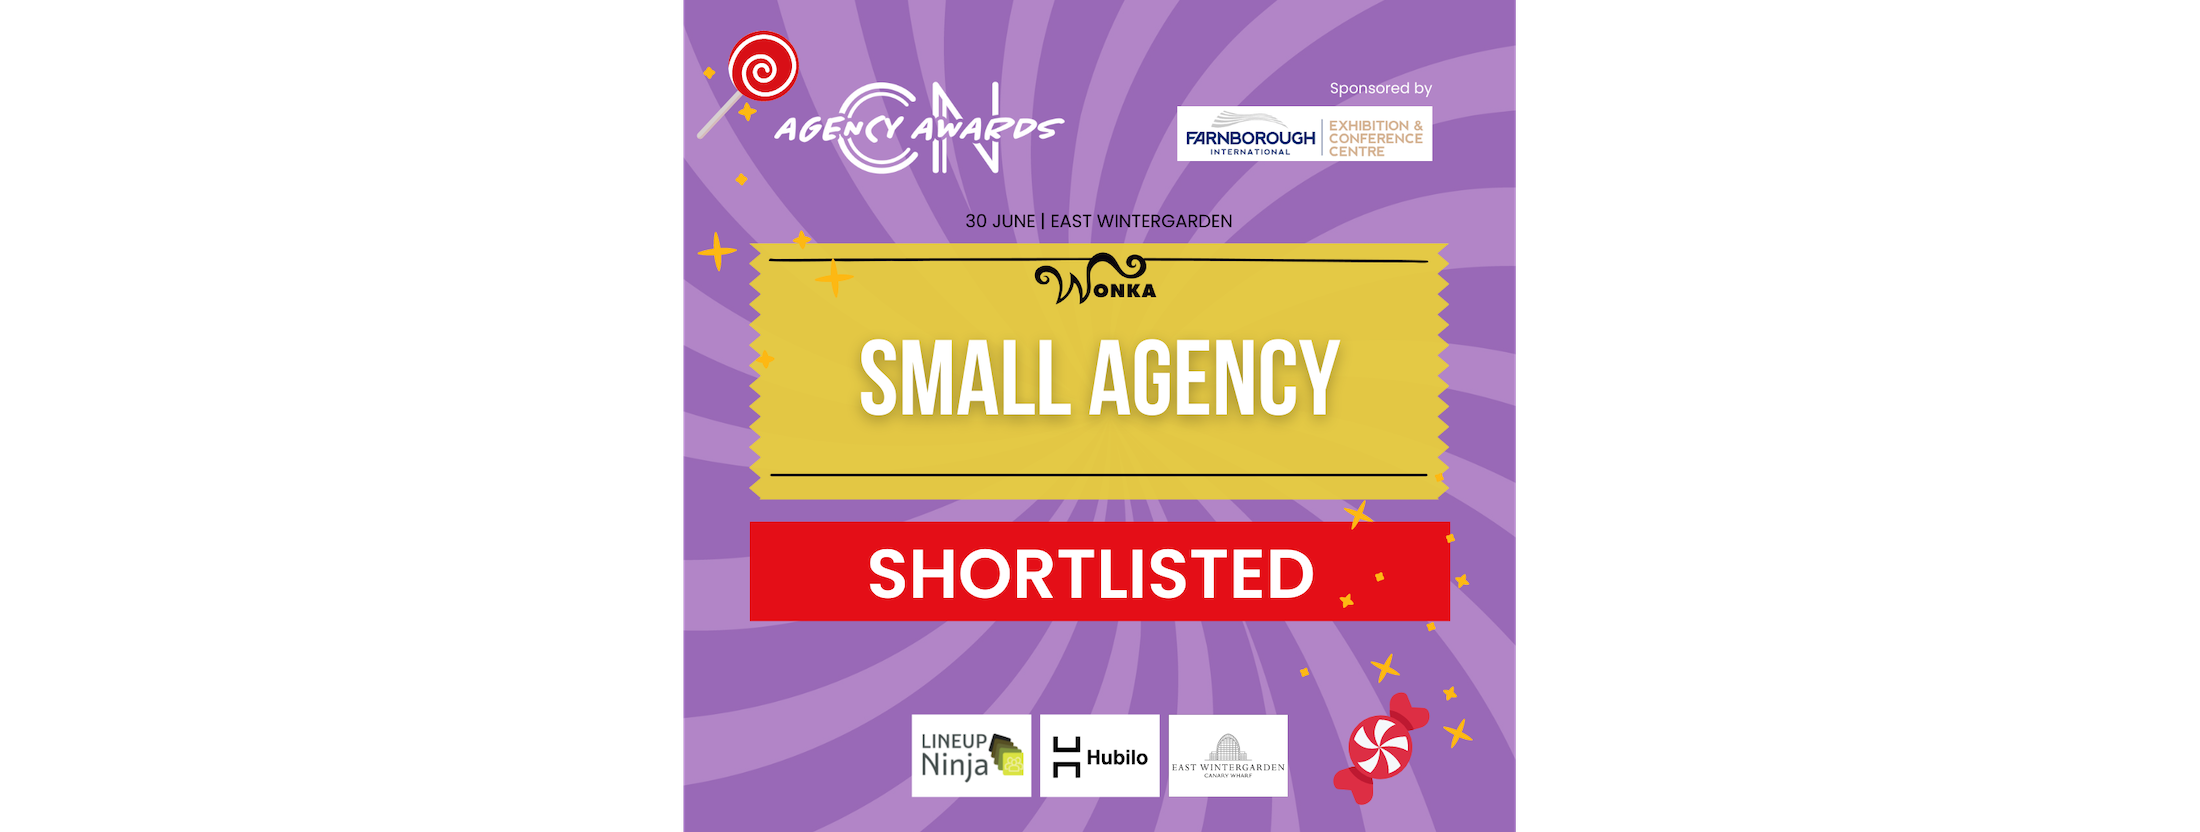 Conference News Awards 2022 Small Agency of the Year Finalists ZiaBia